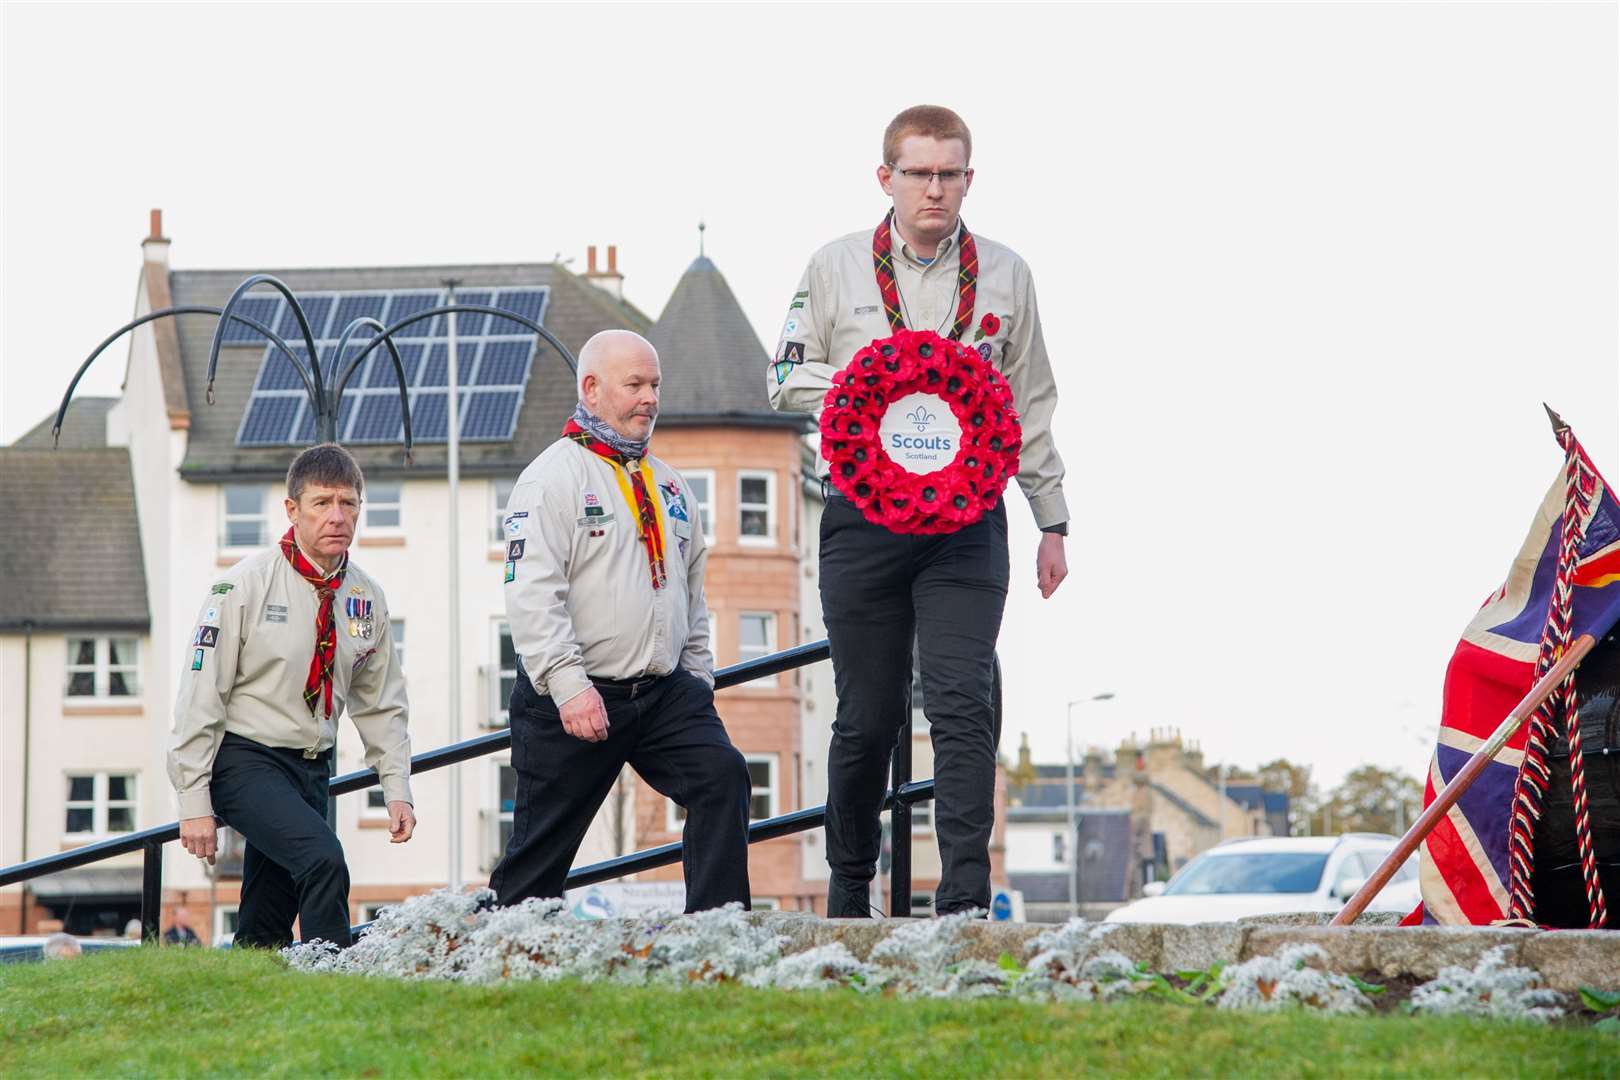 Left to Right - John Berry, John Innes and Craig Barron of the 1st Forres Scout group lay a wreath at the town's memorial...Remembrance Sunday 2020...Picture: Daniel Forsyth..